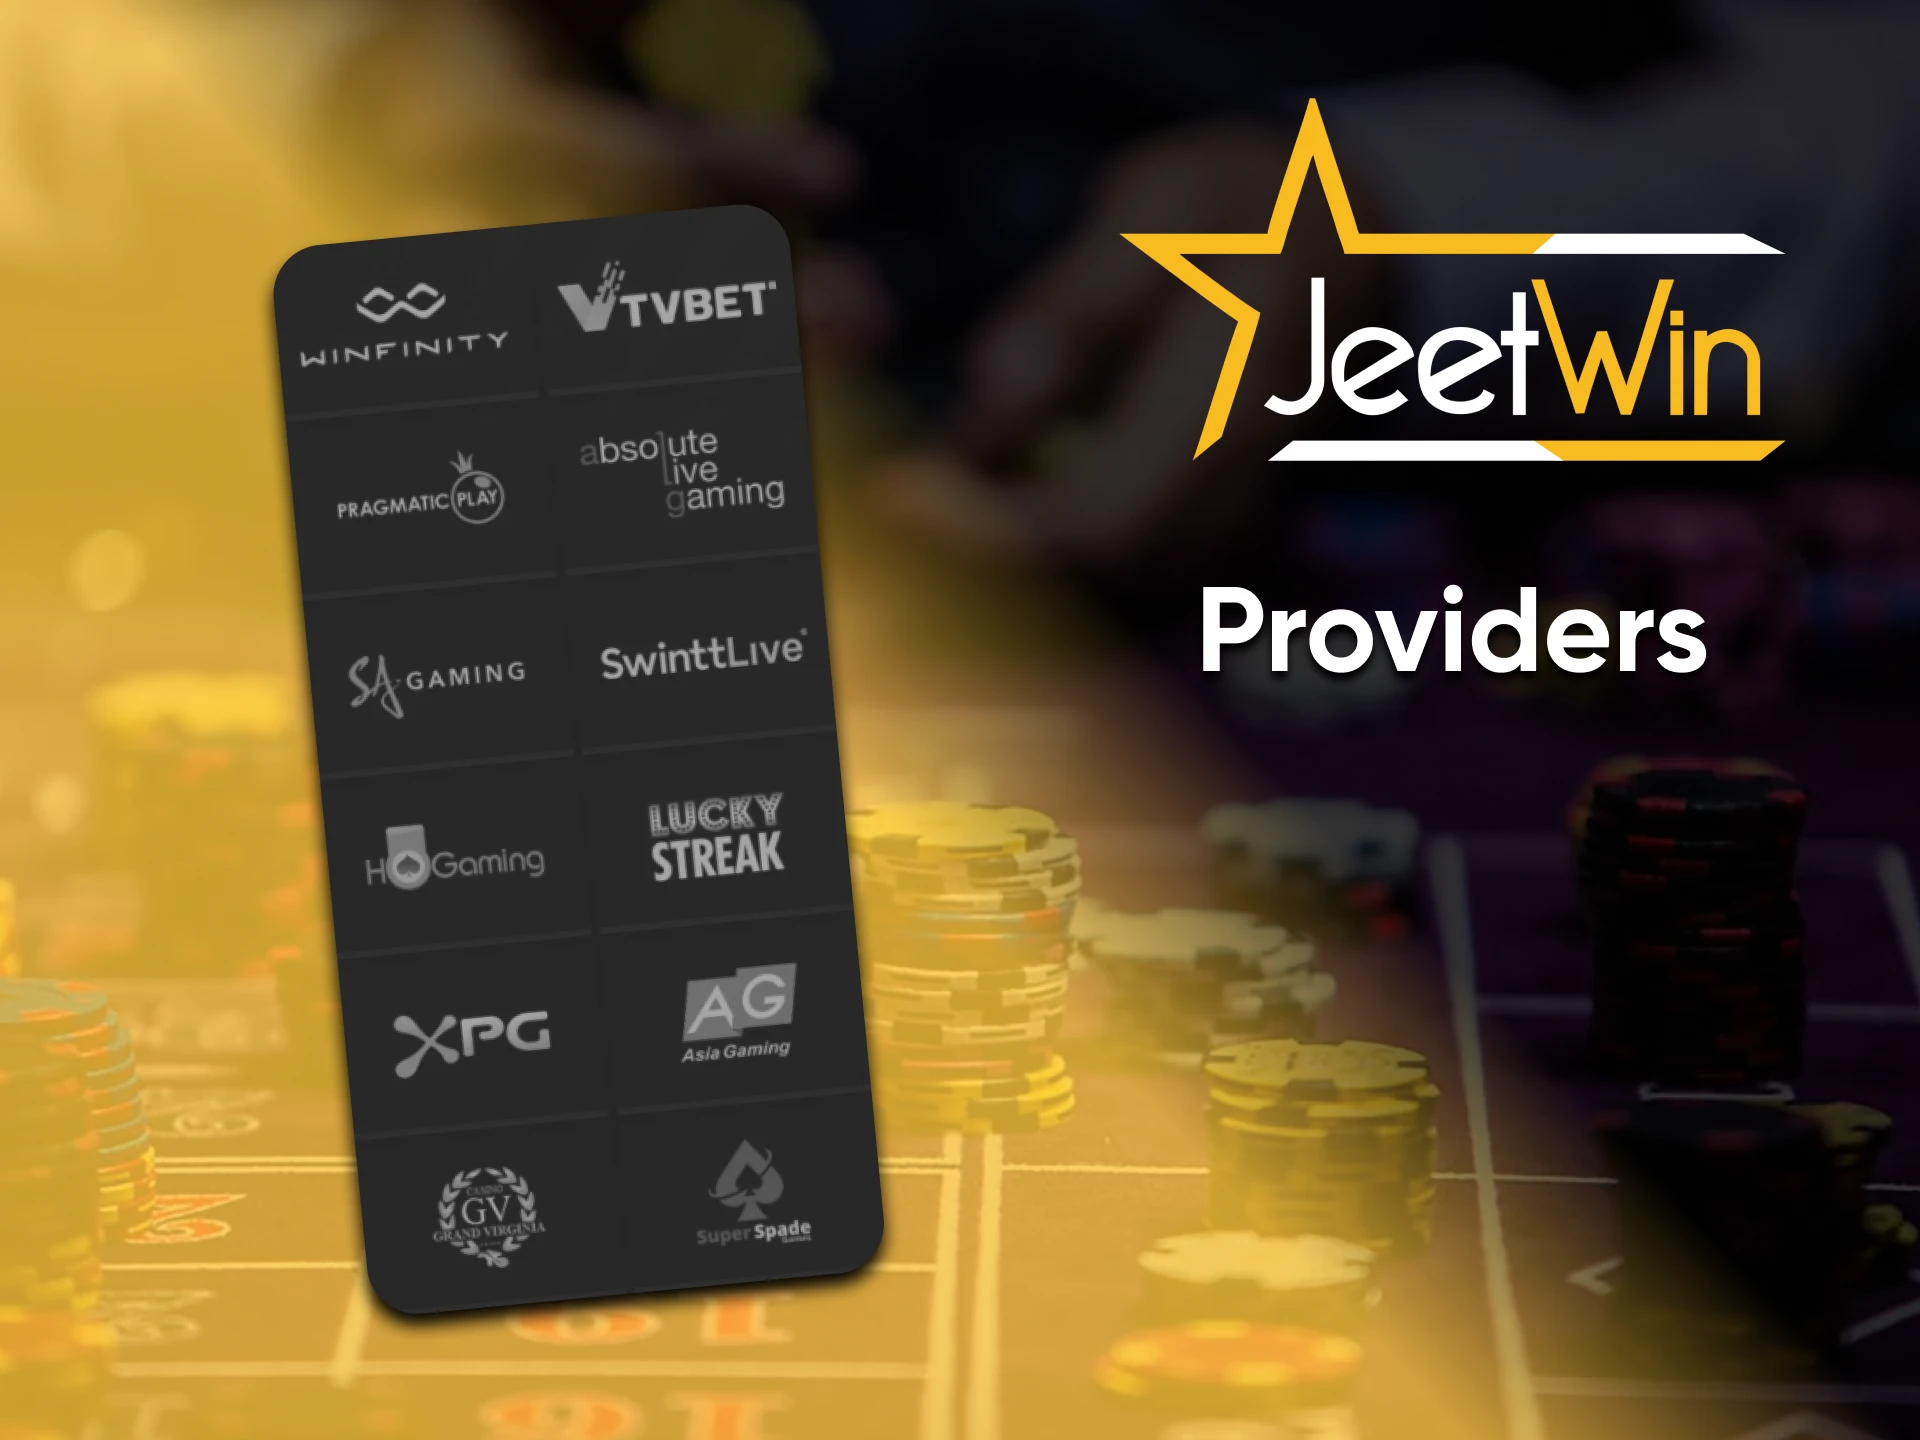 There are many casino game providers on the Jeetwin platform.